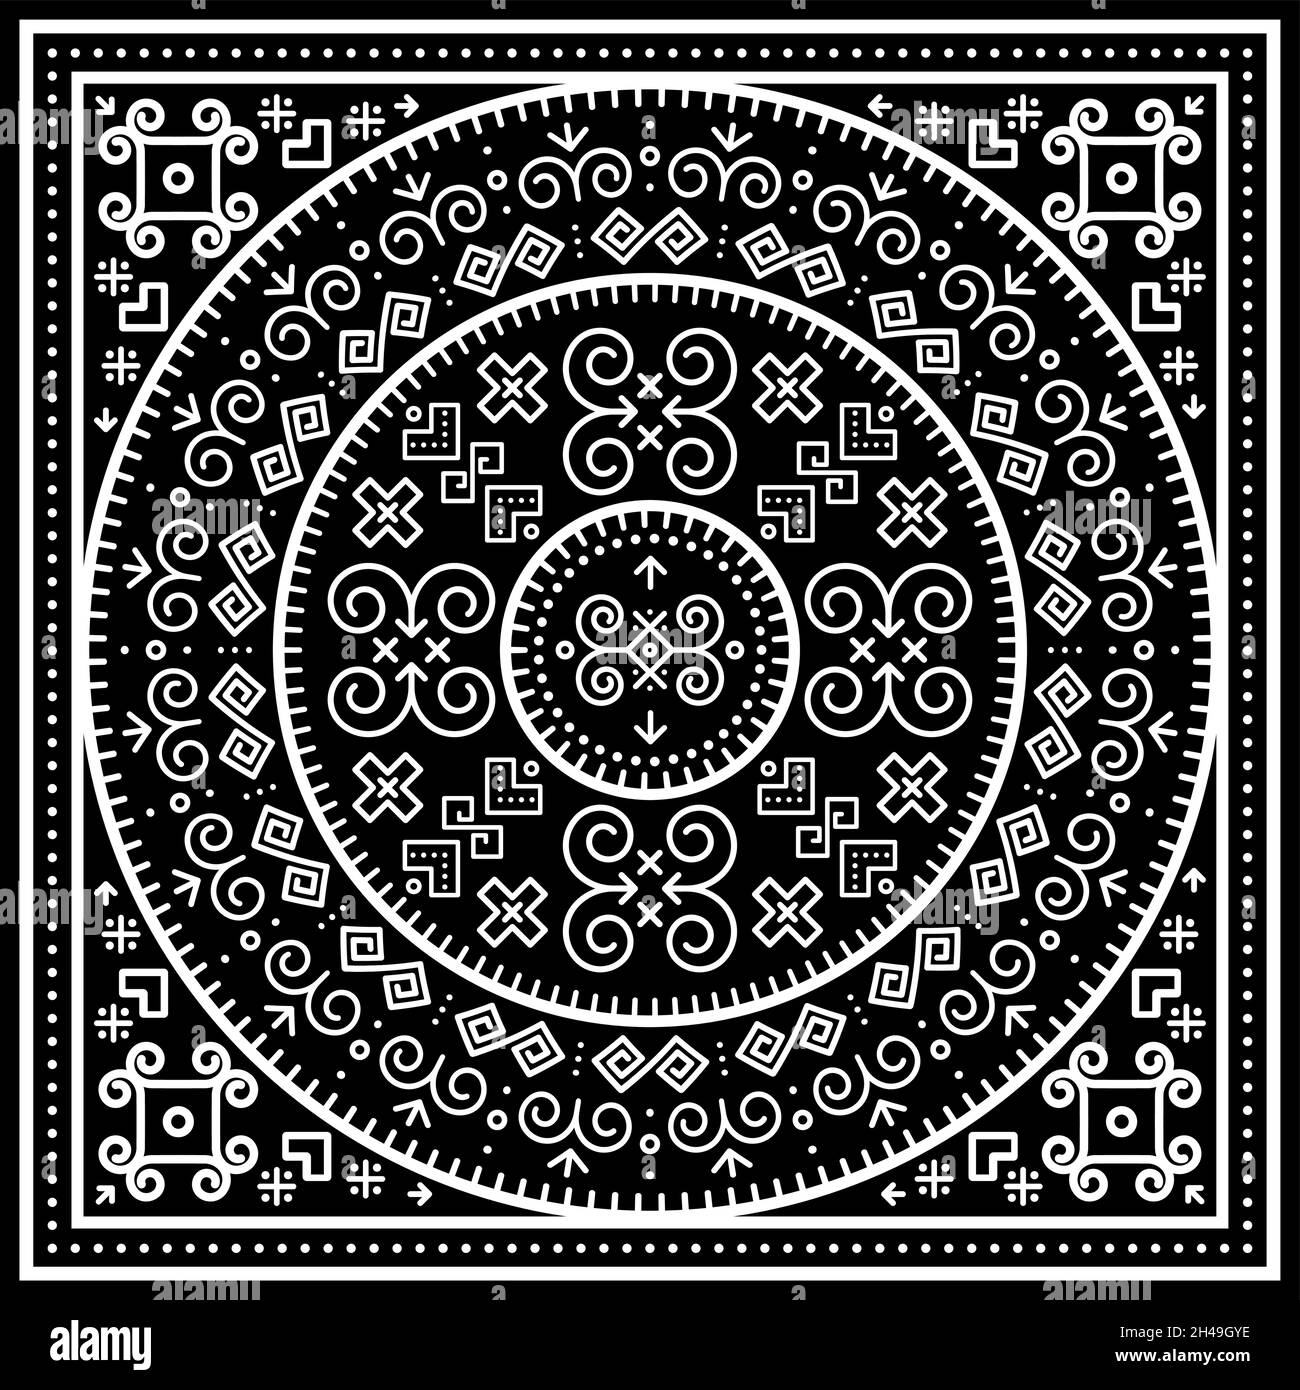 Slovak folk art vector black tribal mandala design with geometric shapes inspired by traditional house paintings from village Cicmany in Slovakia Stock Vector